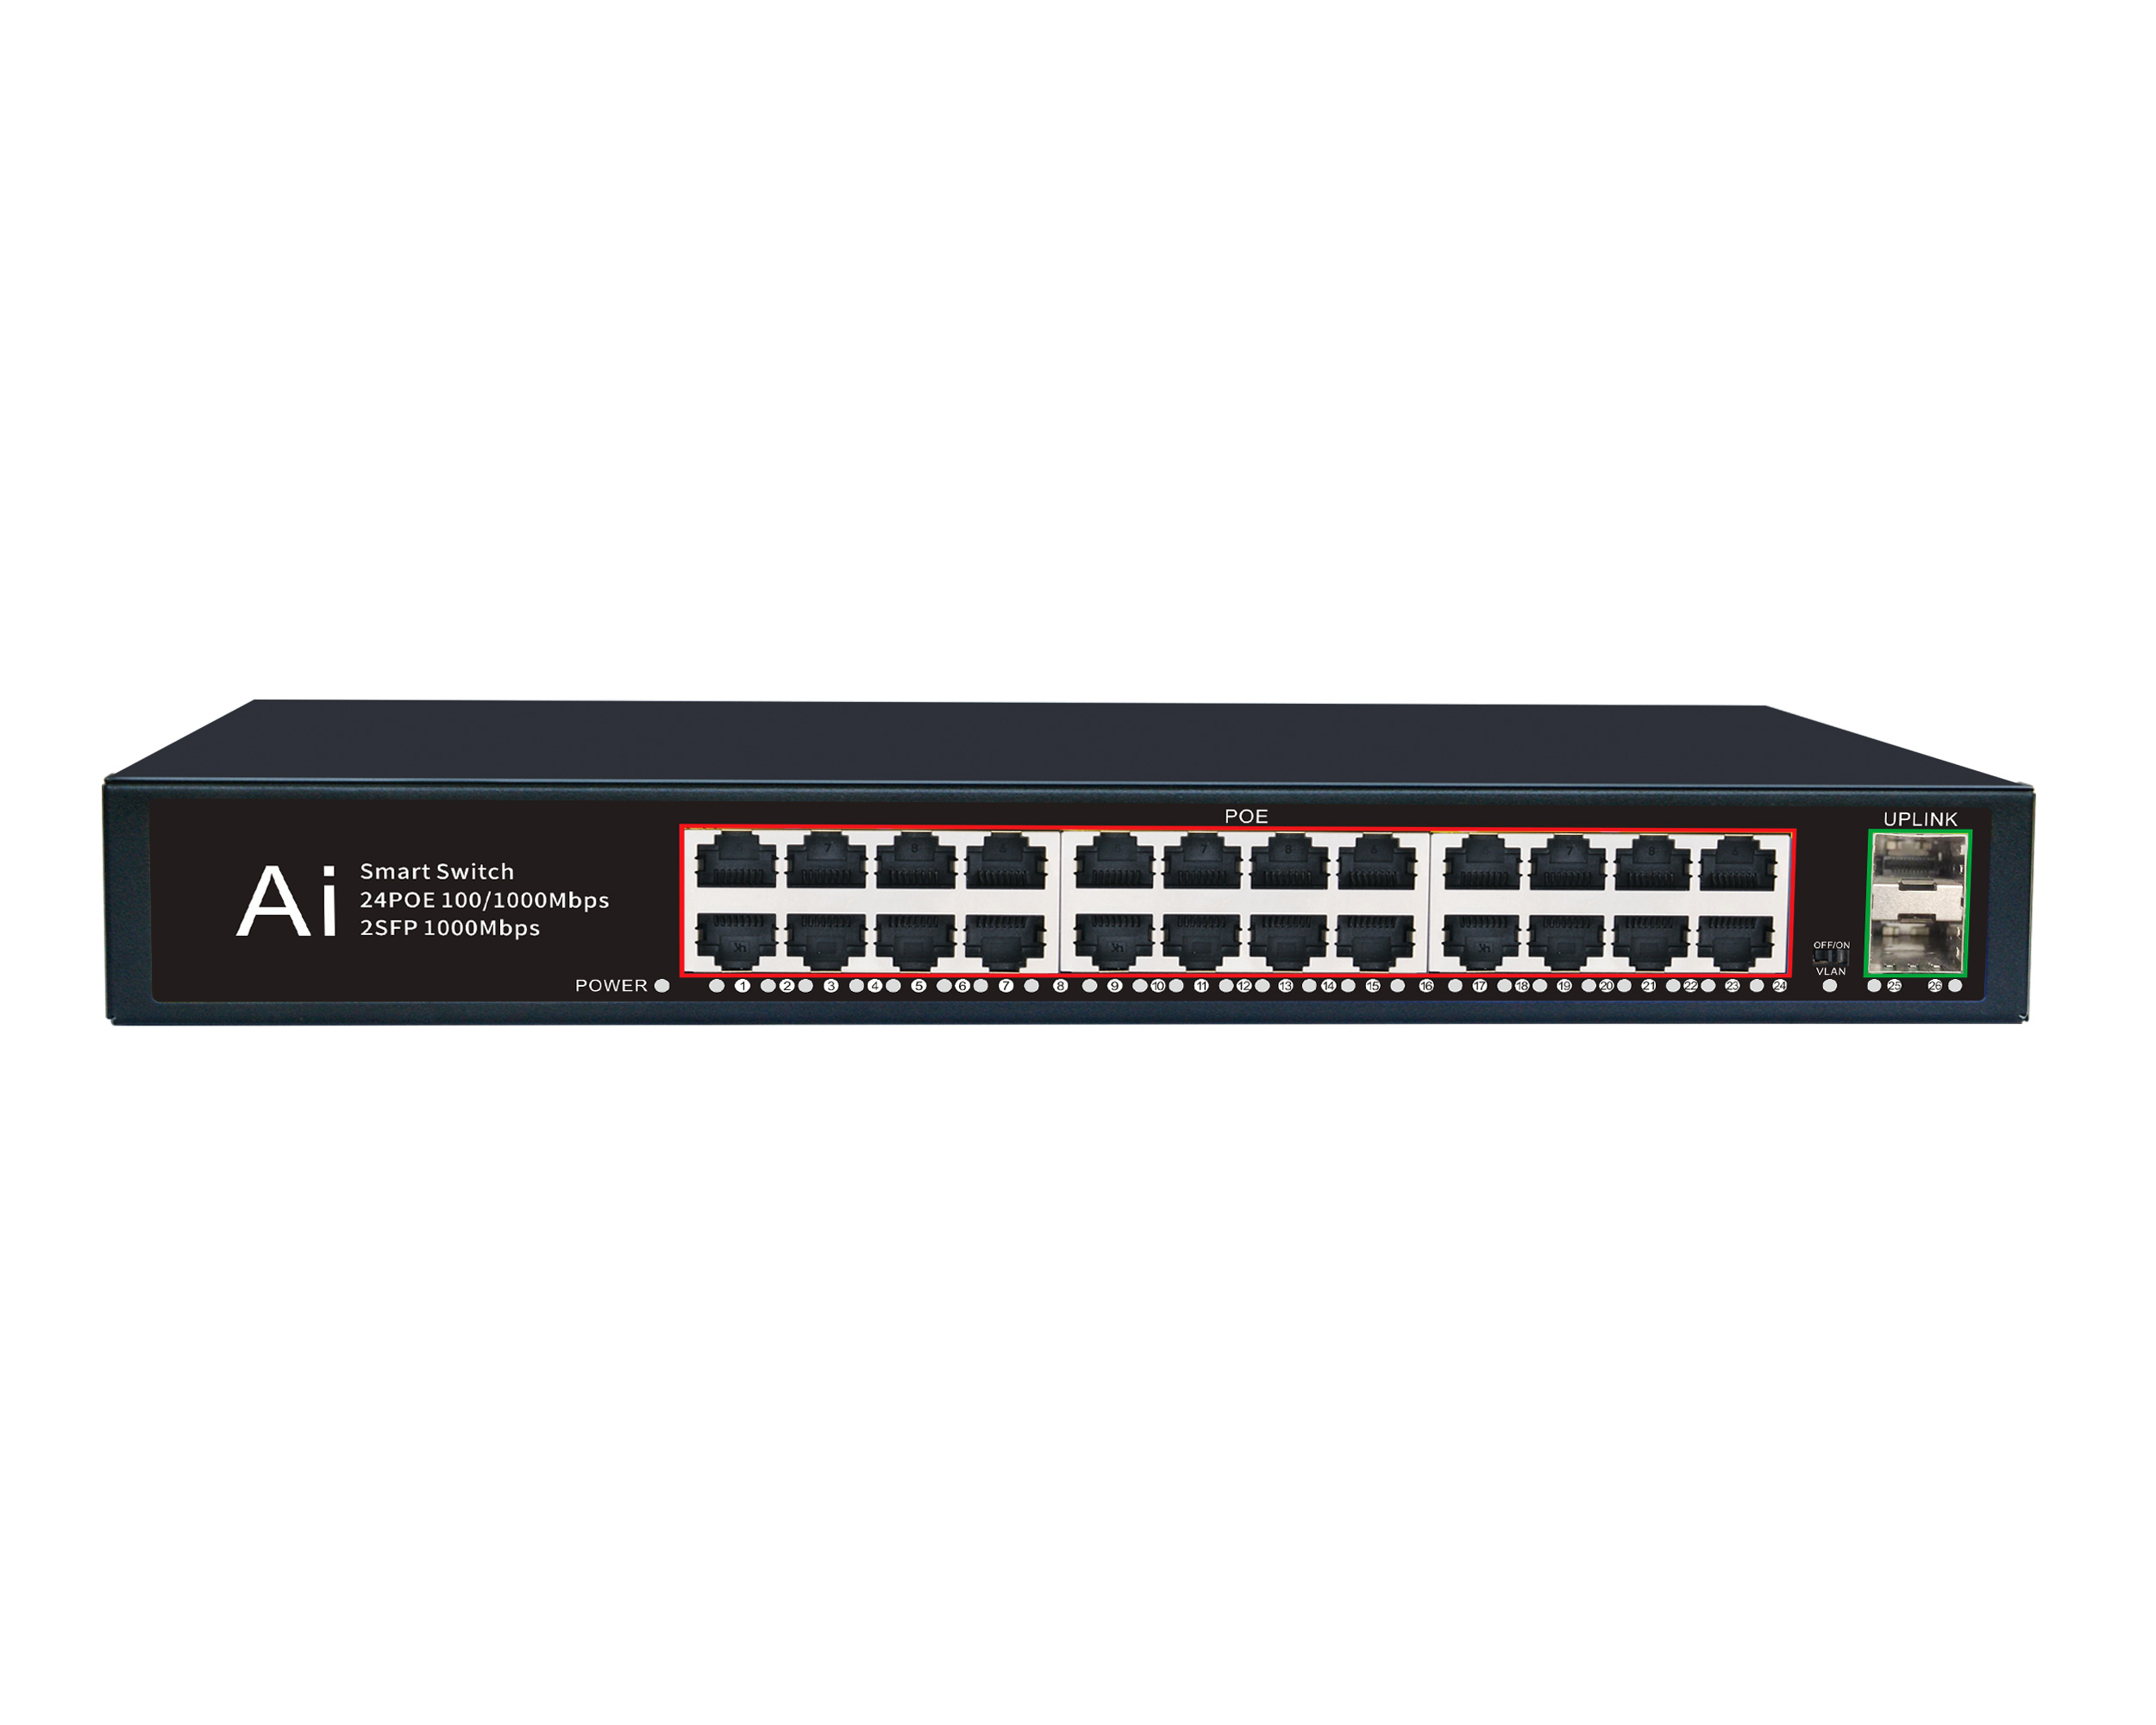 Can a POE switch transmit a distance of 250 meters?